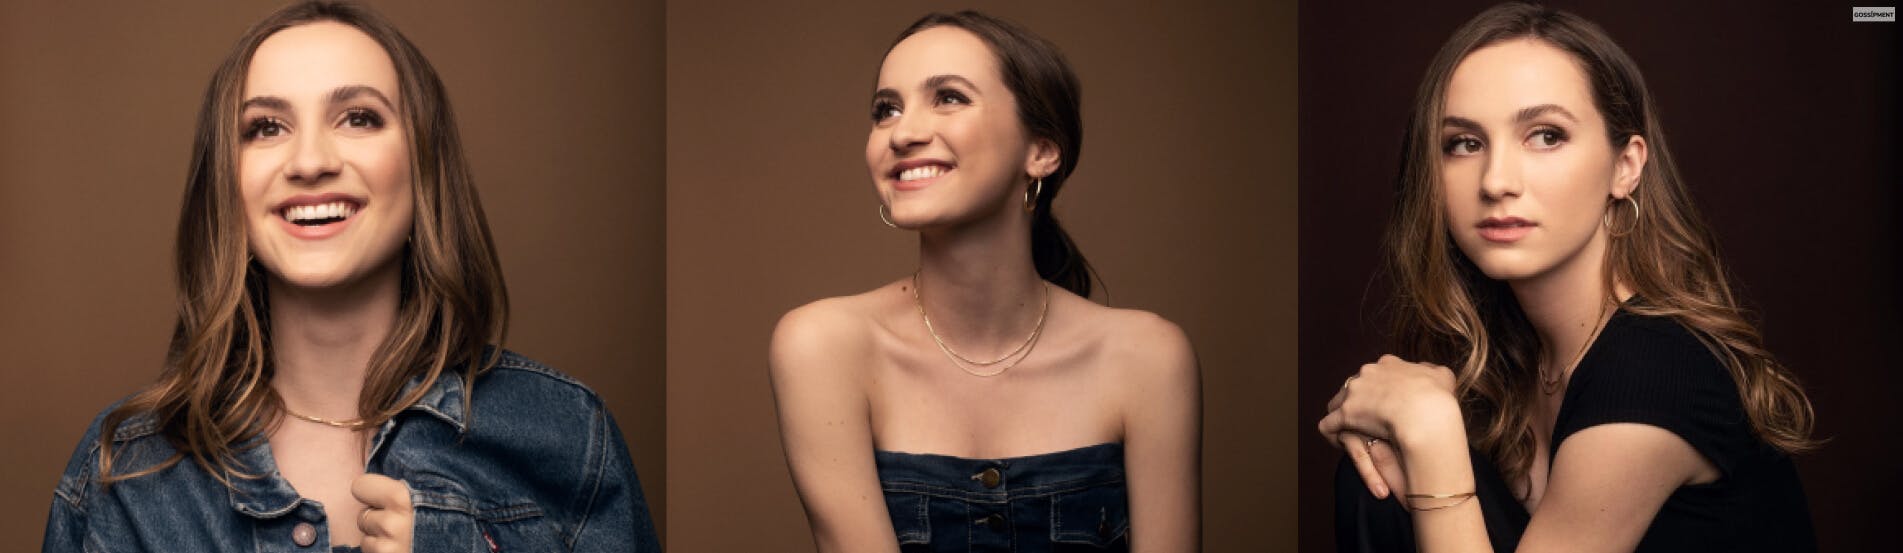 Cover Image for Maude Apatow: Latest News, Movies, Gossip